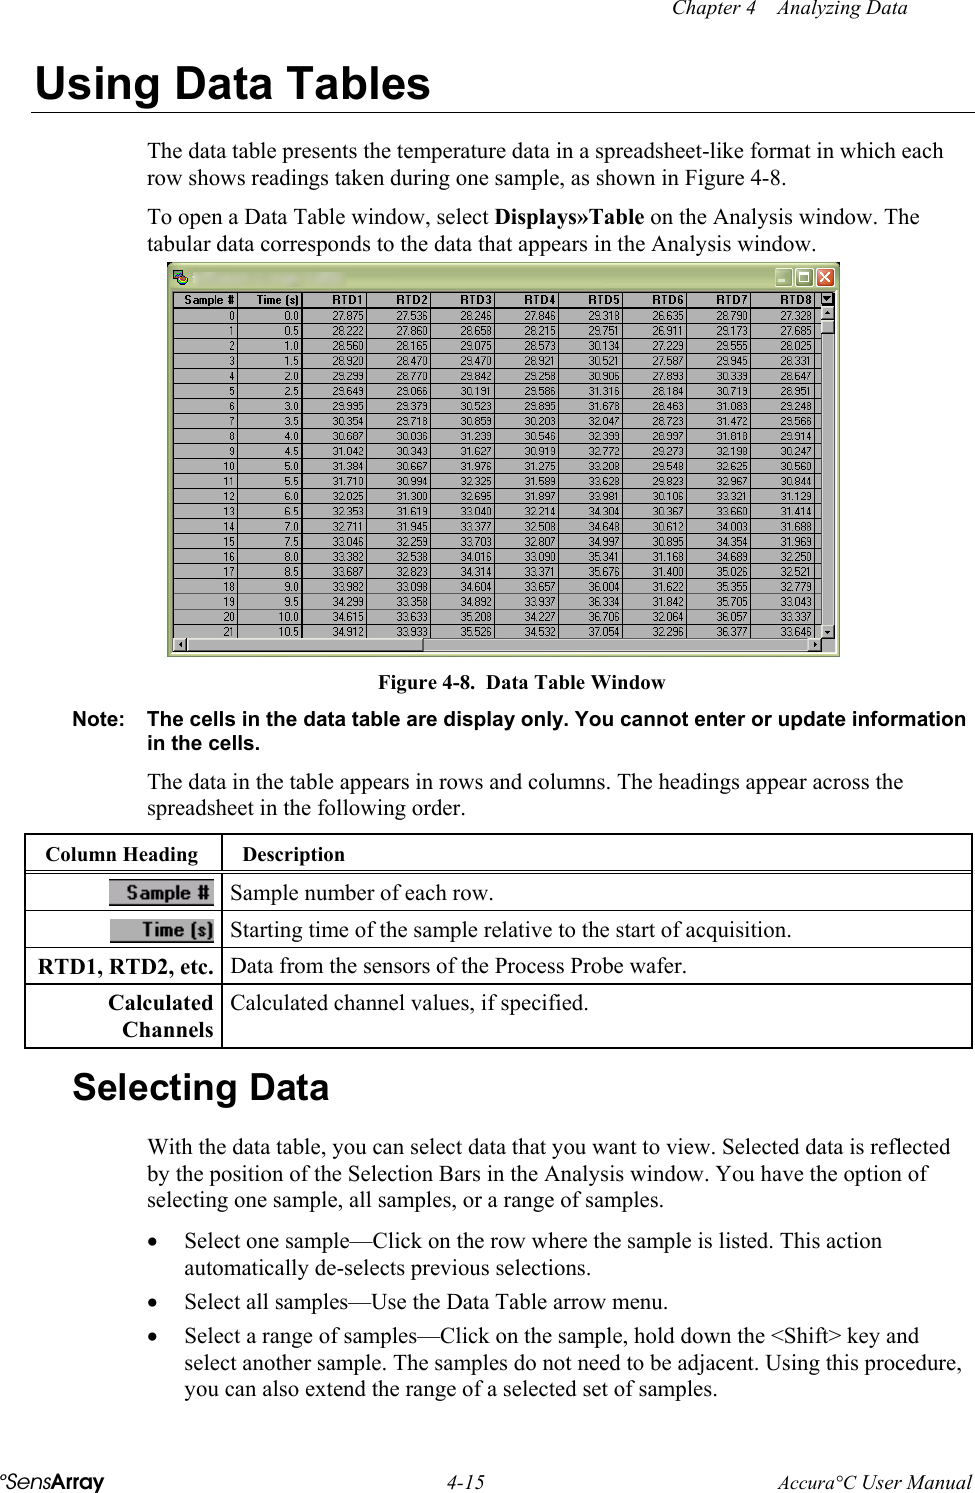  Chapter 4    Analyzing Data °SensArray 4-15 Accura°C User Manual Using Data Tables The data table presents the temperature data in a spreadsheet-like format in which each row shows readings taken during one sample, as shown in Figure 4-8. To open a Data Table window, select Displays»Table on the Analysis window. The tabular data corresponds to the data that appears in the Analysis window.  Figure 4-8.  Data Table Window Note:  The cells in the data table are display only. You cannot enter or update information in the cells. The data in the table appears in rows and columns. The headings appear across the spreadsheet in the following order. Column Heading  Description  Sample number of each row.    Starting time of the sample relative to the start of acquisition. RTD1, RTD2, etc.   Data from the sensors of the Process Probe wafer. Calculated Channels Calculated channel values, if specified. Selecting Data With the data table, you can select data that you want to view. Selected data is reflected by the position of the Selection Bars in the Analysis window. You have the option of selecting one sample, all samples, or a range of samples.  •  Select one sample—Click on the row where the sample is listed. This action automatically de-selects previous selections. •  Select all samples—Use the Data Table arrow menu. •  Select a range of samples—Click on the sample, hold down the &lt;Shift&gt; key and select another sample. The samples do not need to be adjacent. Using this procedure, you can also extend the range of a selected set of samples. 